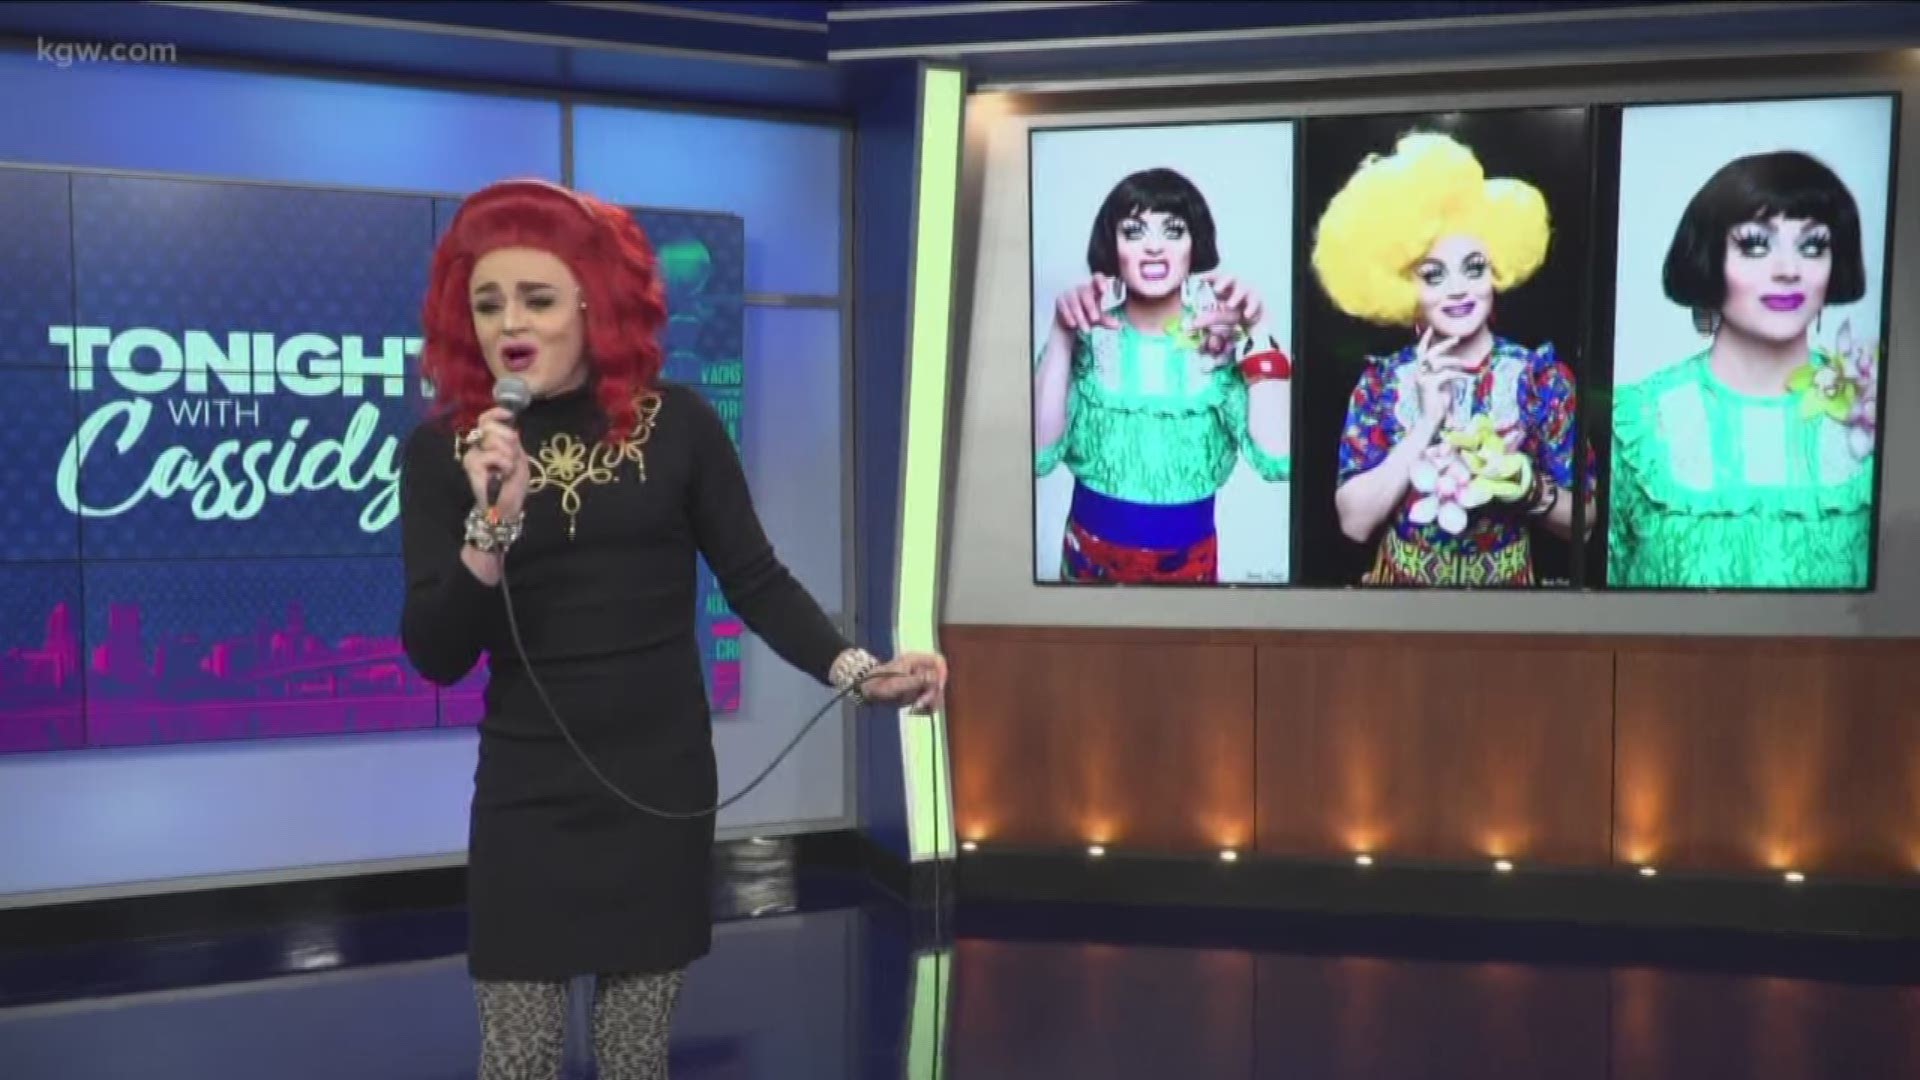 Tammie Brown competed on RuPaul's Drag Race. You can get her album now. It's called 'A Little Bit of Tammie.'

tammiebrown.net

#TonightwithCassidy